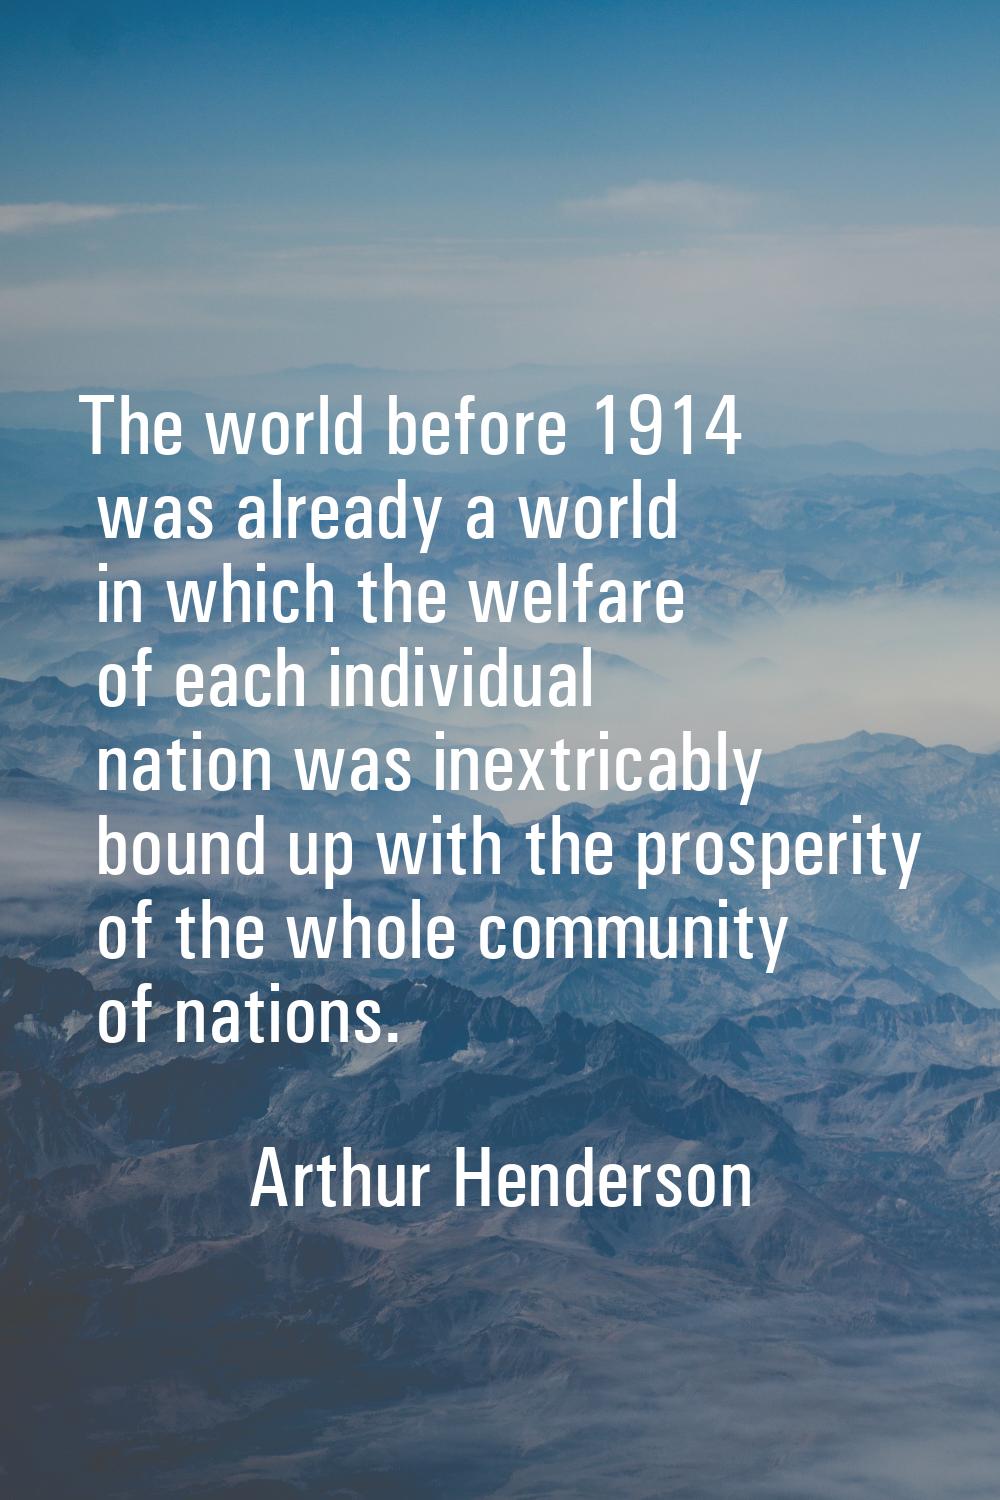 The world before 1914 was already a world in which the welfare of each individual nation was inextr